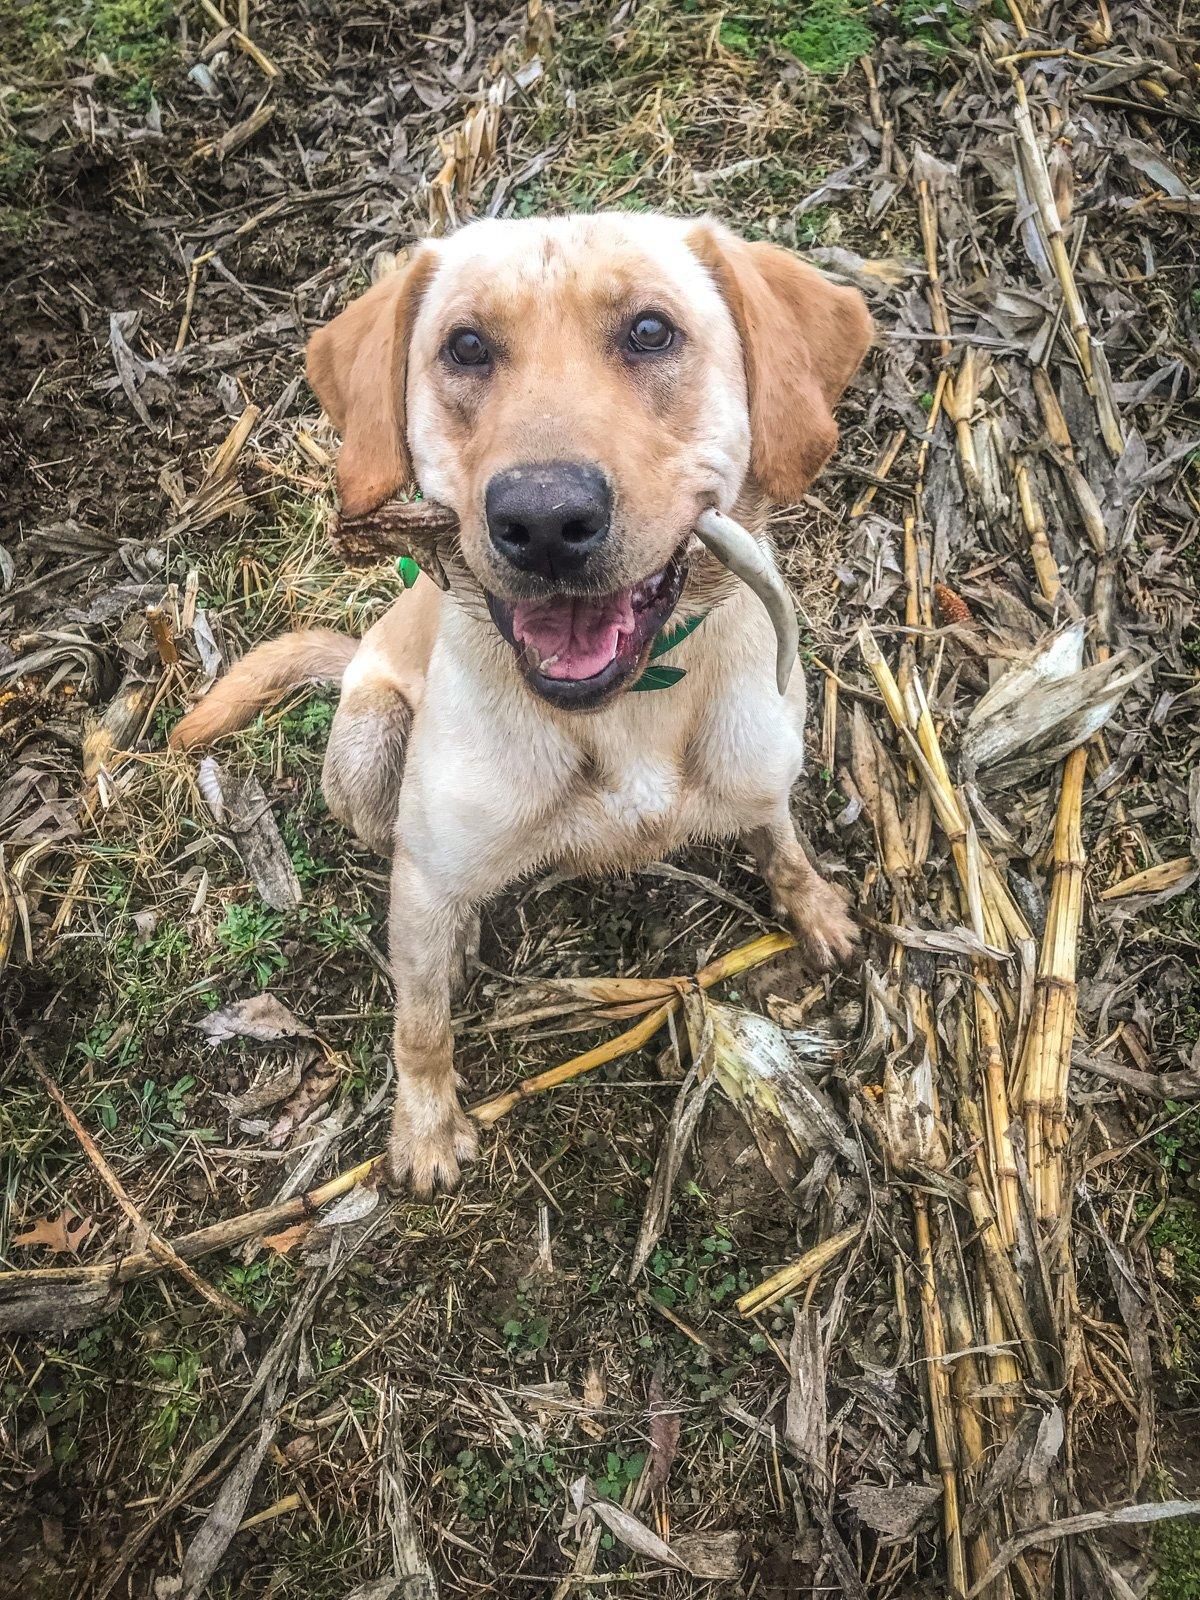 You can train any breed to find shed antlers, but Moore is fond of retrievers because they are natural hunters and instinctually want to bring things to their owner. (Natalie and Scott Spalding photo)